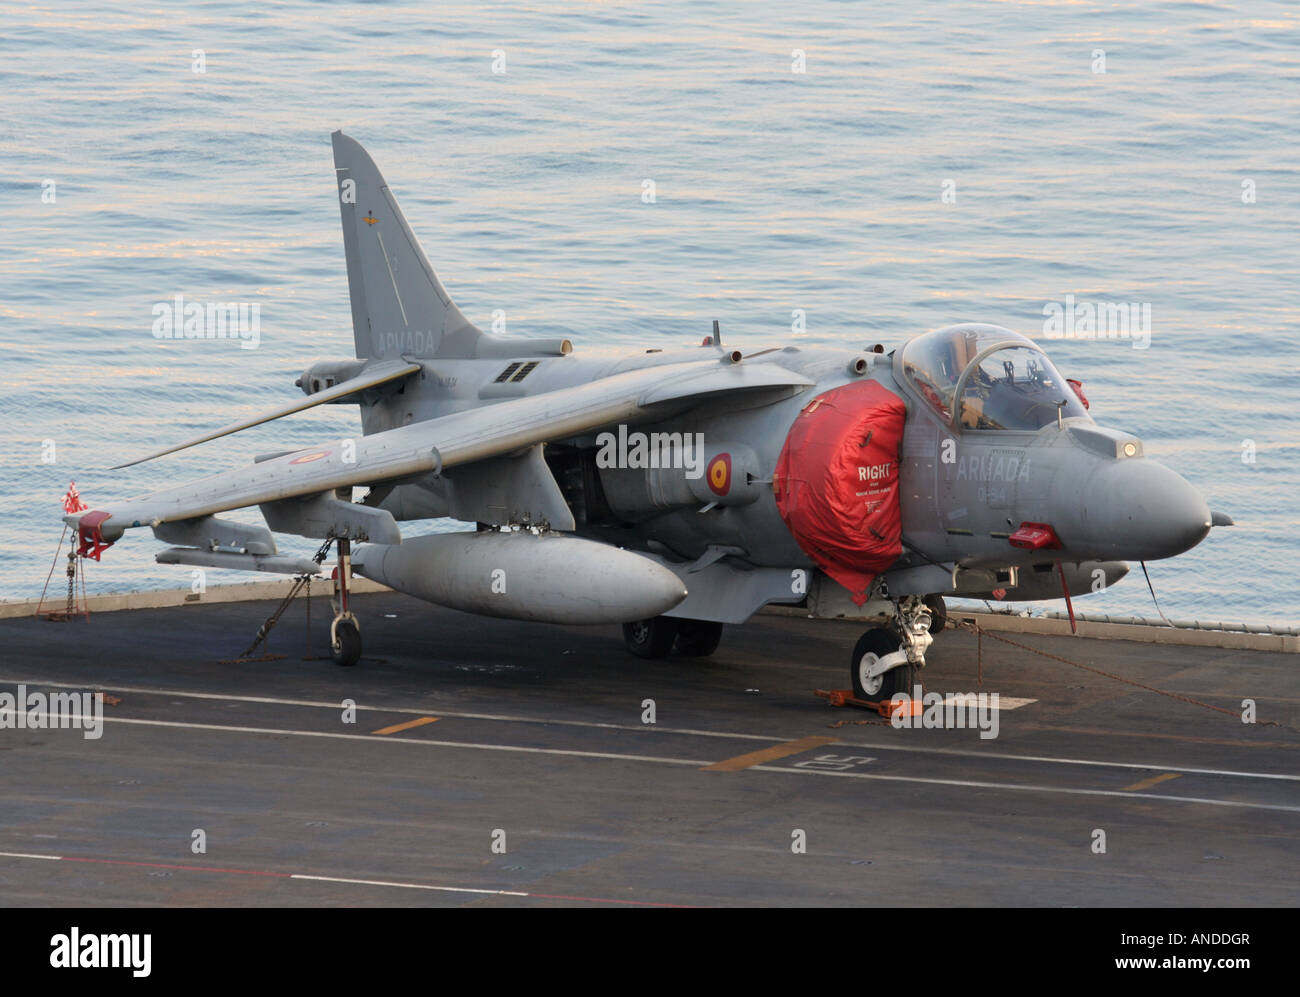 A Spanish Navy EAV-8B+ Harrier military jet fighter airplane on board the aircraft carrier Principe de Asturias Stock Photo